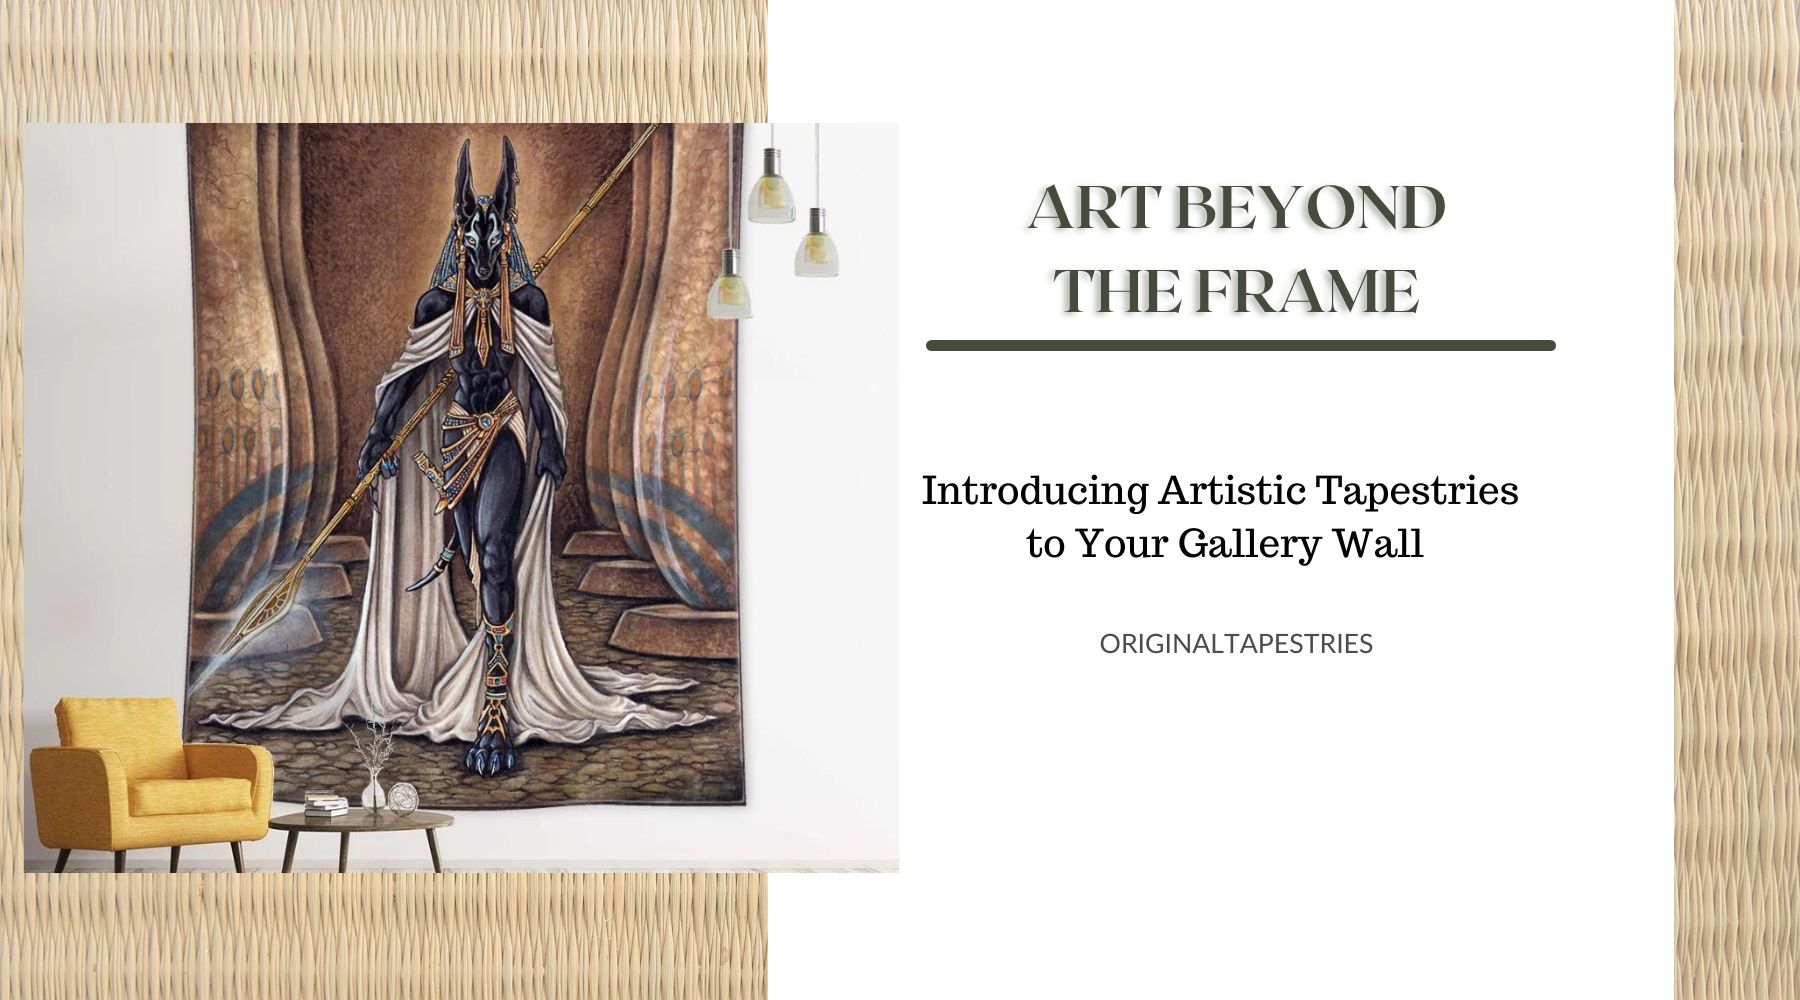 Art Beyond the Frame: Introducing Artistic Tapestries to Your Gallery Wall